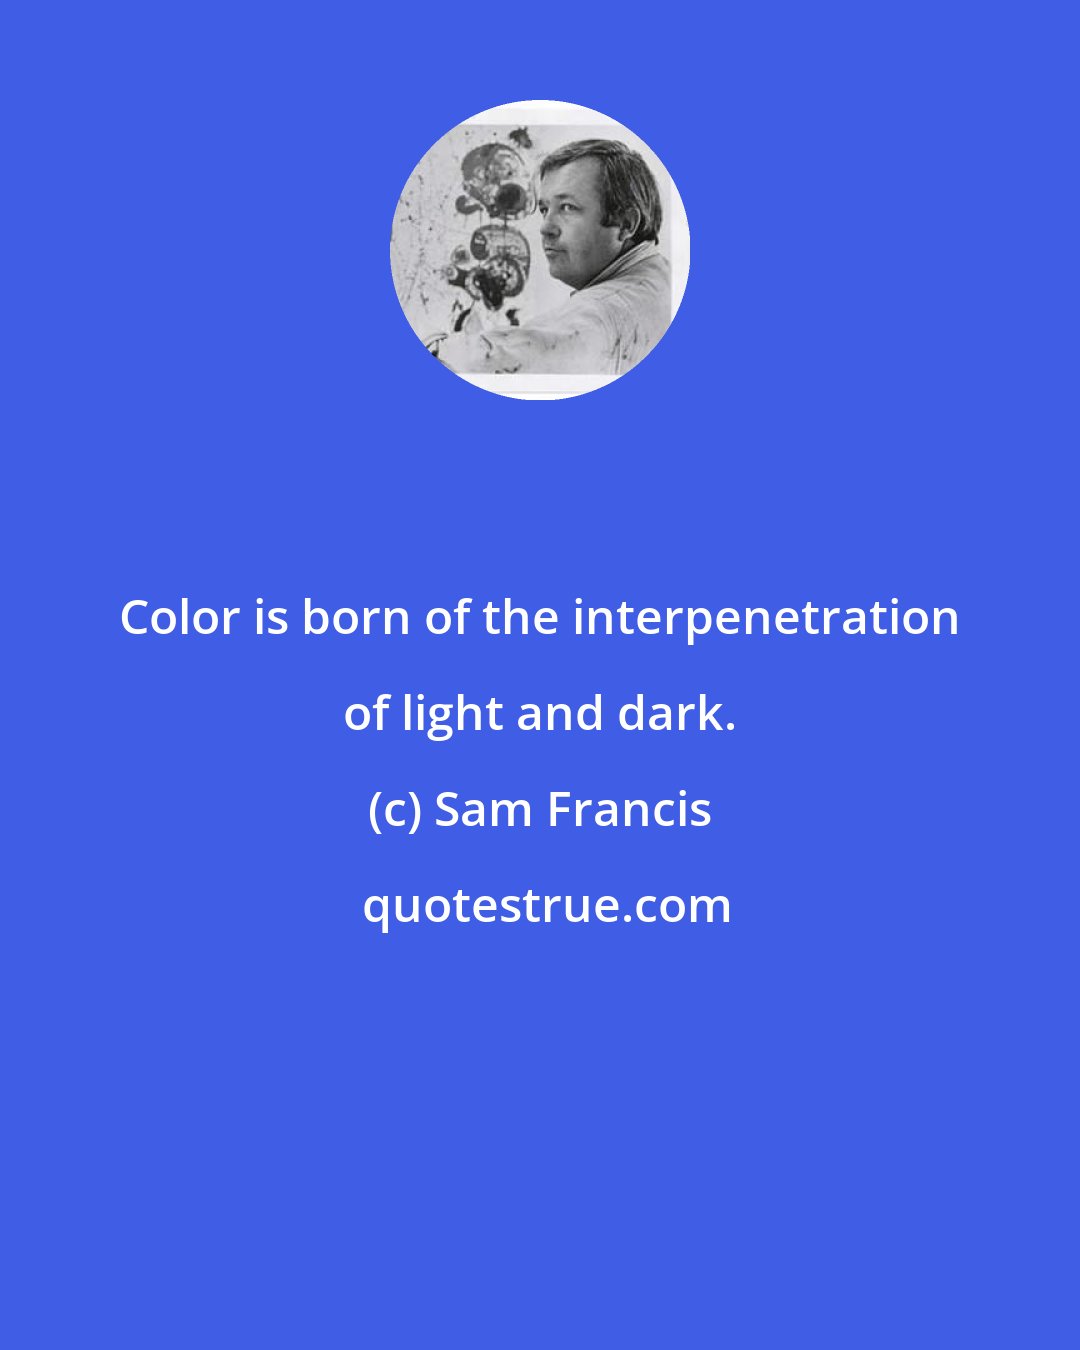 Sam Francis: Color is born of the interpenetration of light and dark.